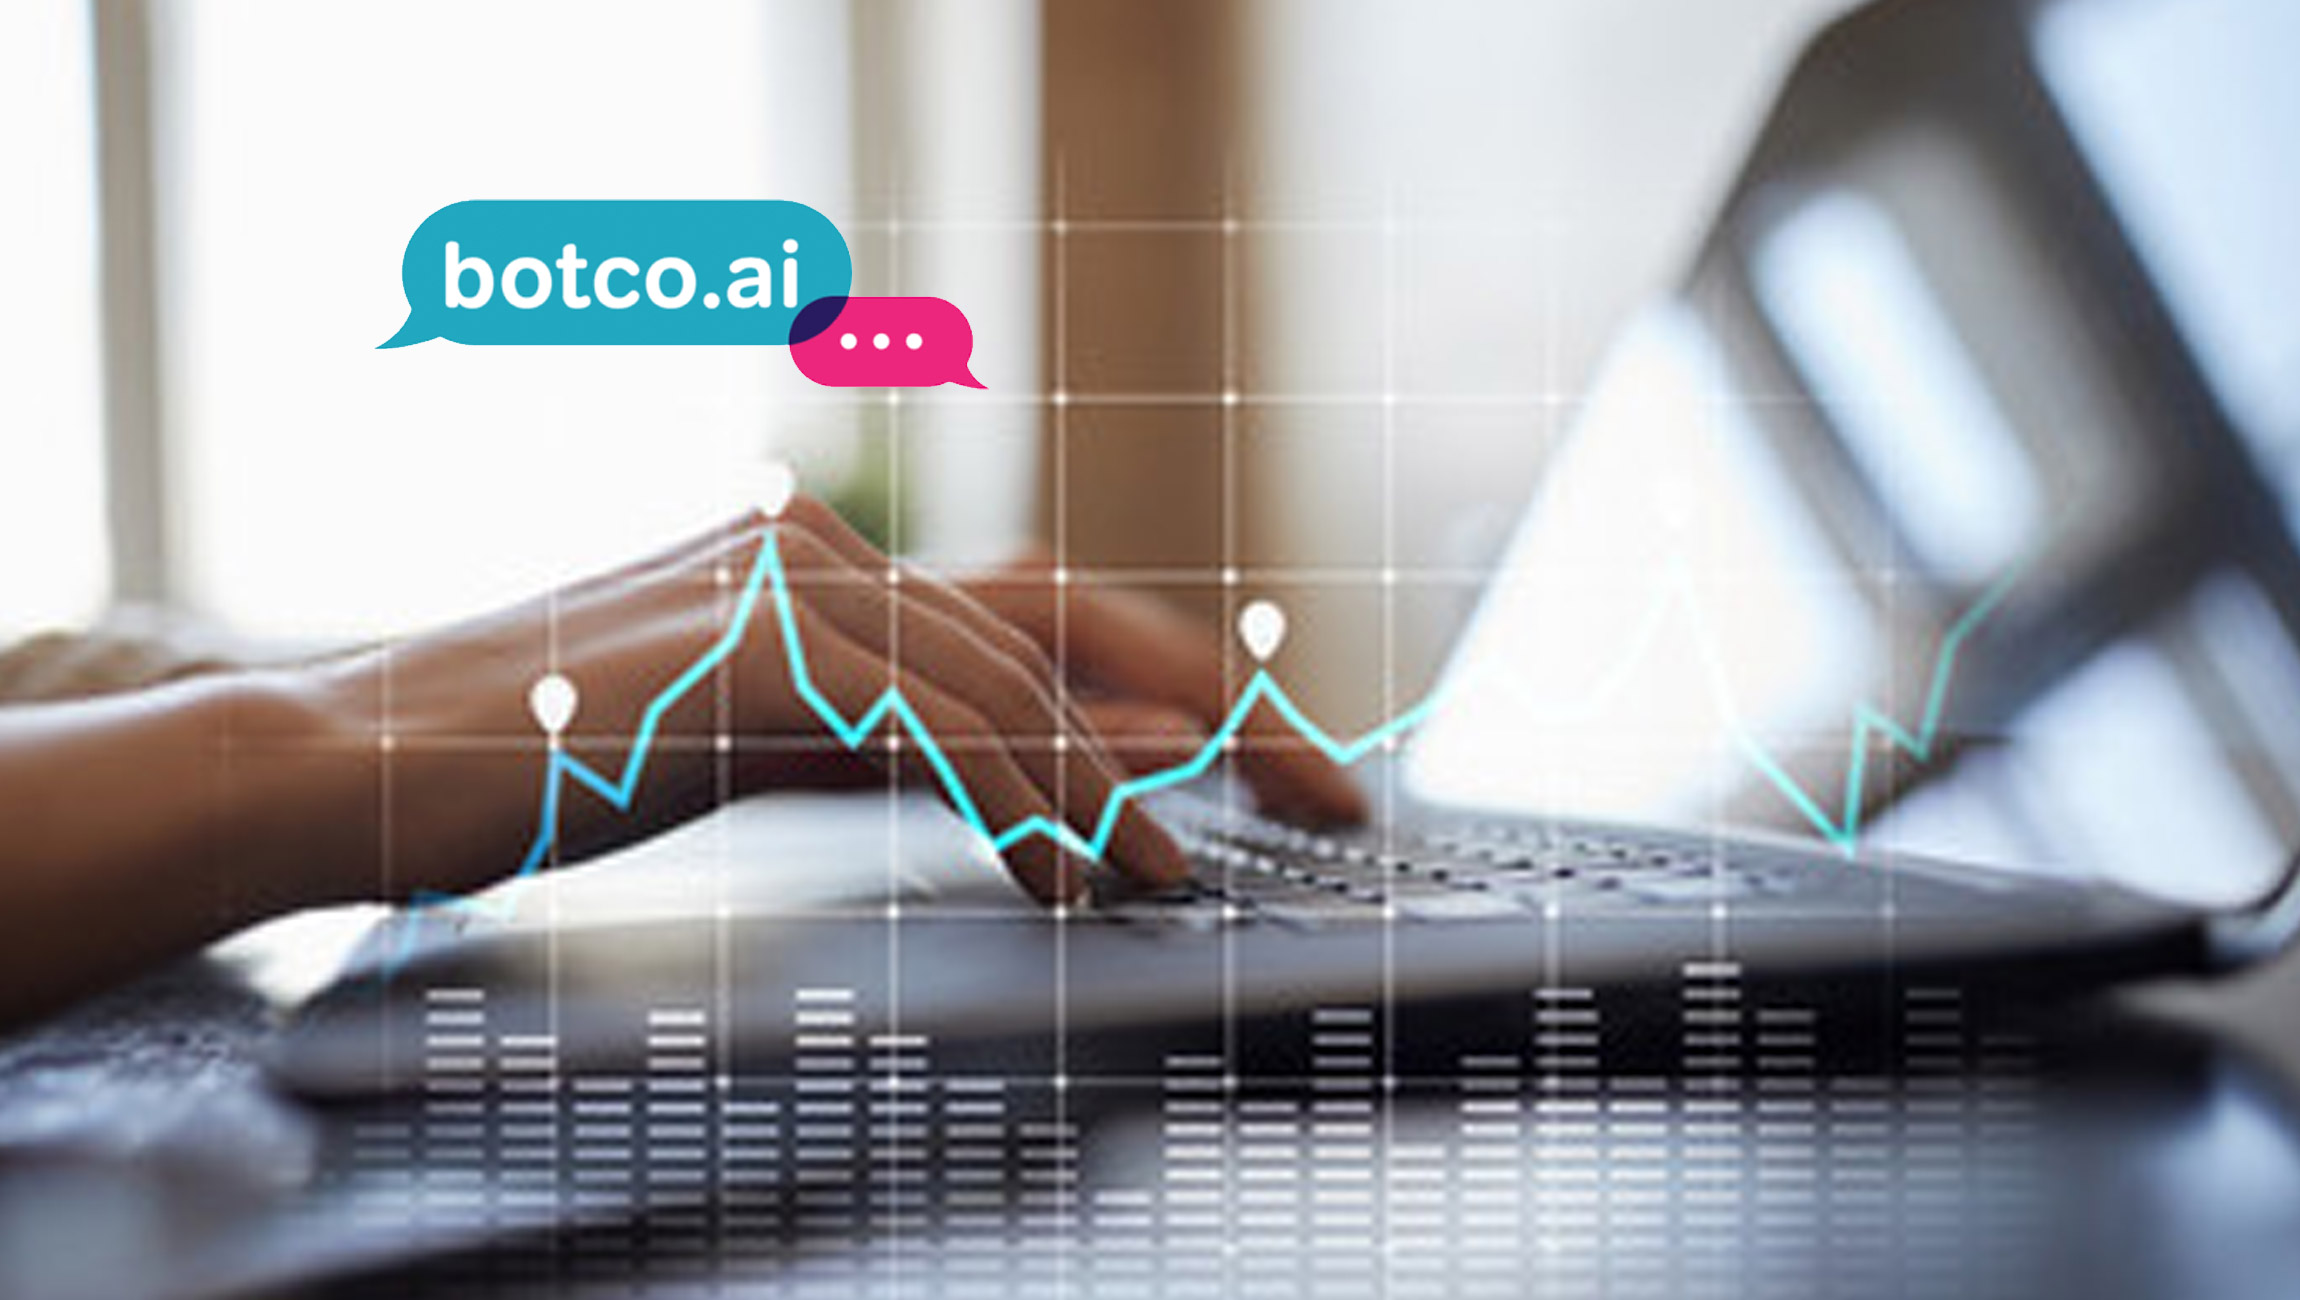 Three Out of Four Contact Centers Leverage Chatbots to Improve Performance, Botco.ai Survey Finds 1